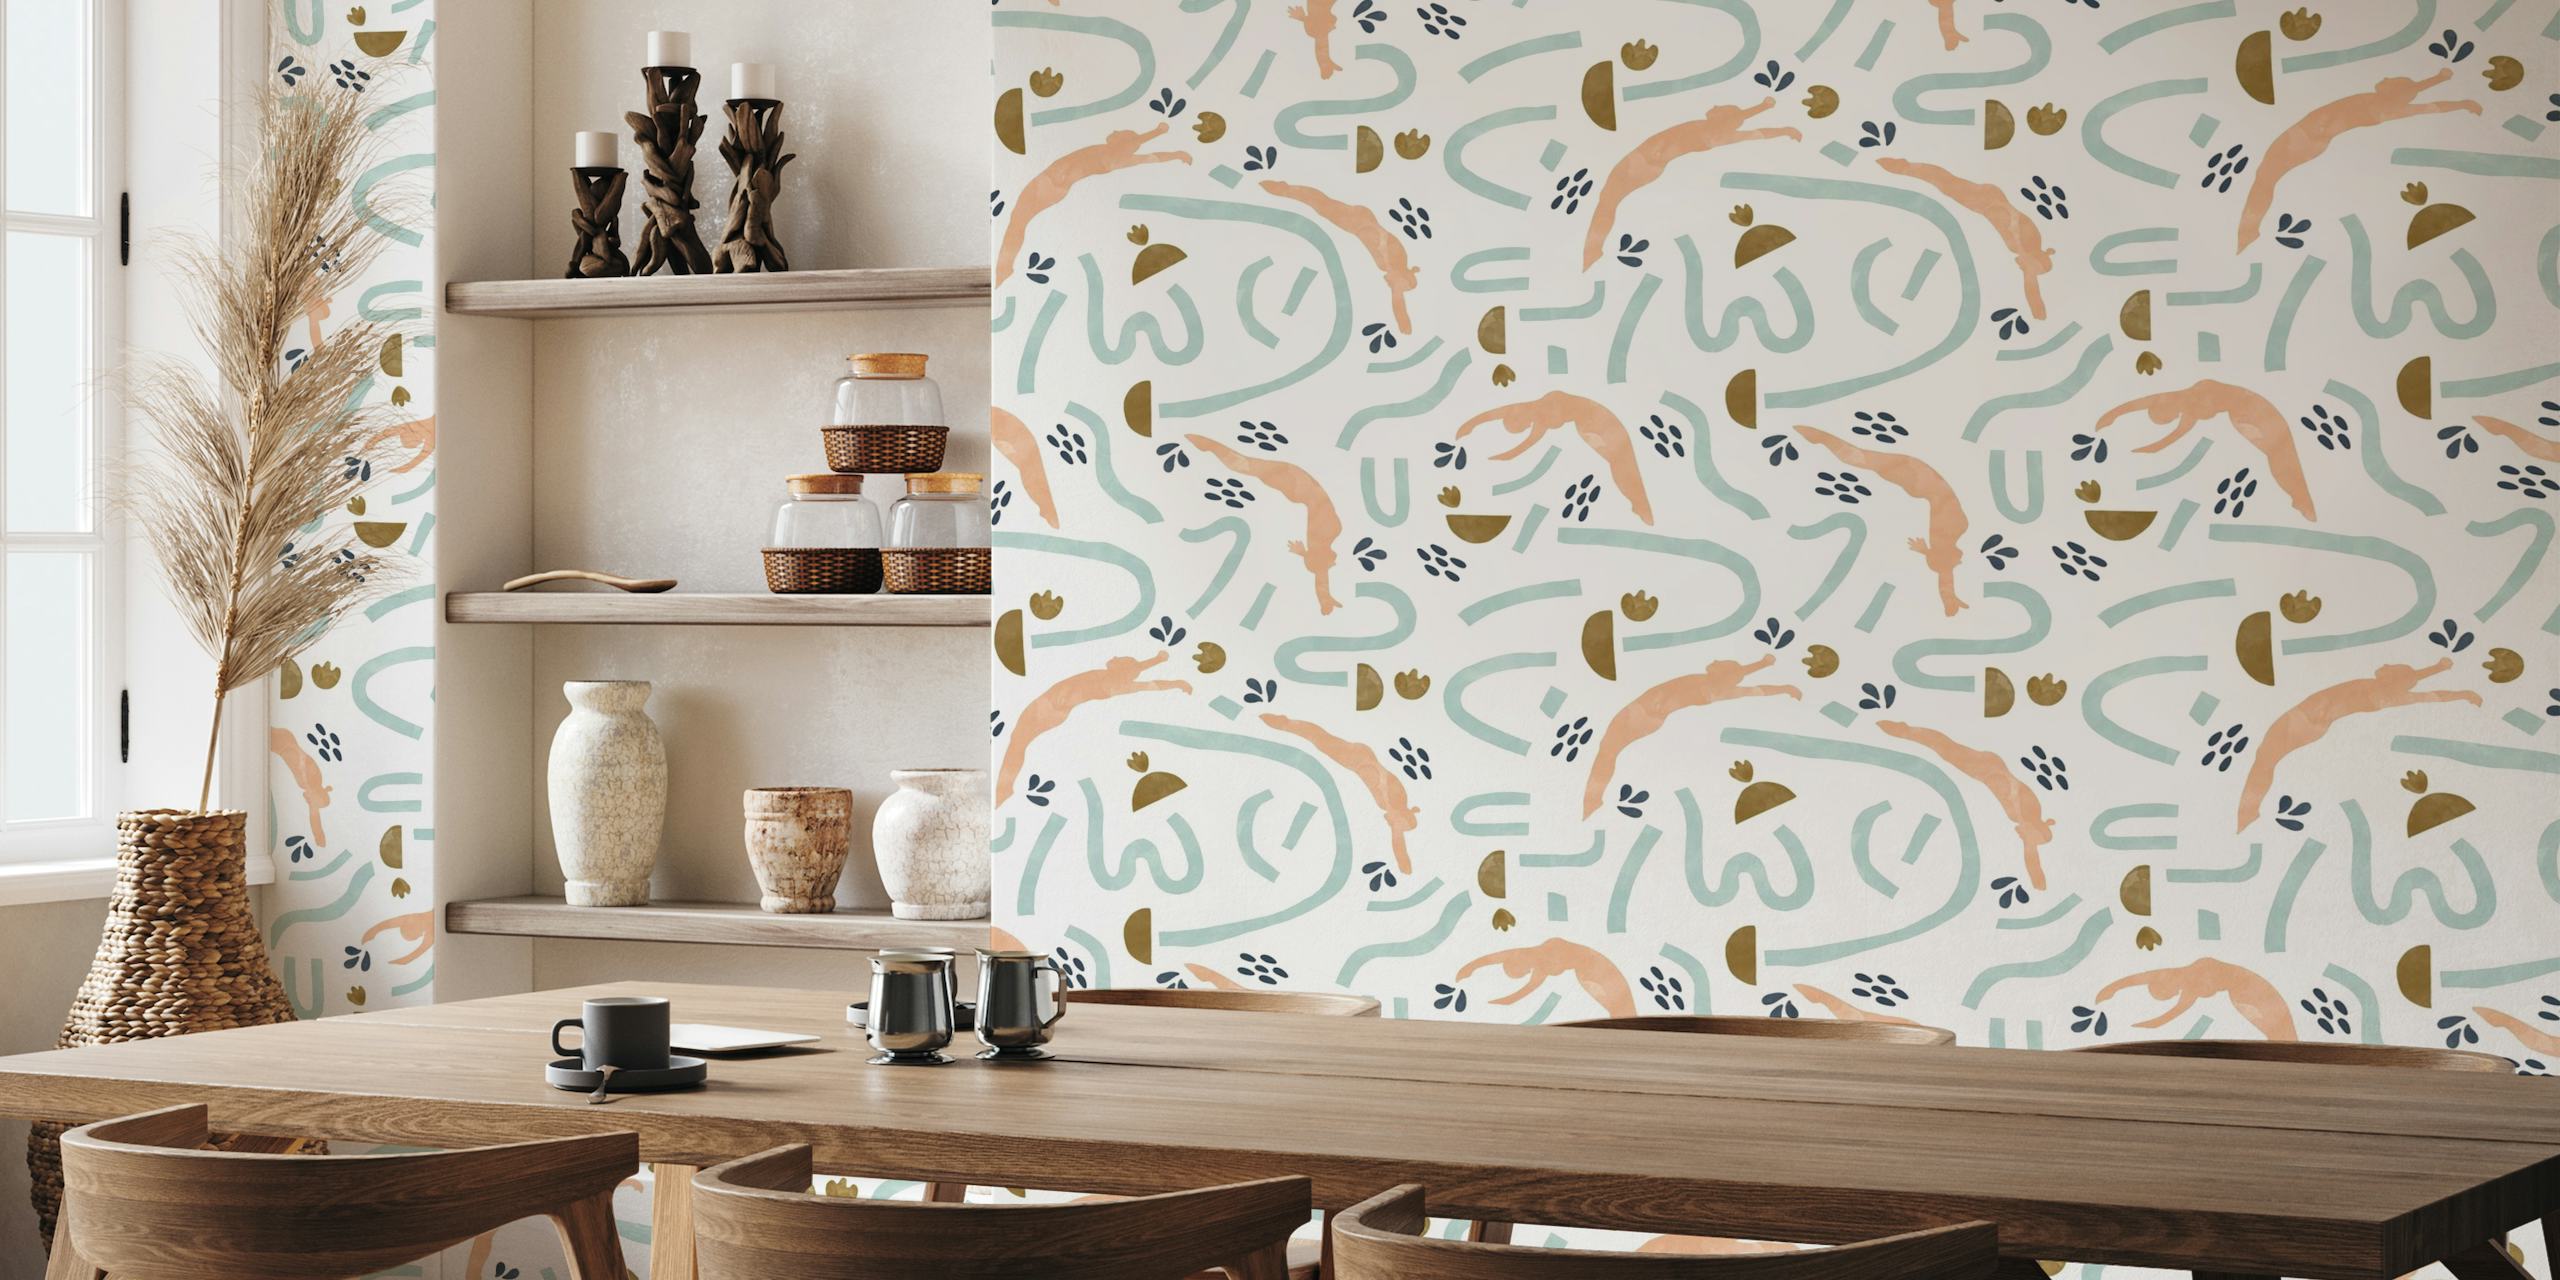 A playful, beach-themed wall mural with illustrations of people swimming and soaking up the sun in soft pastel colors.